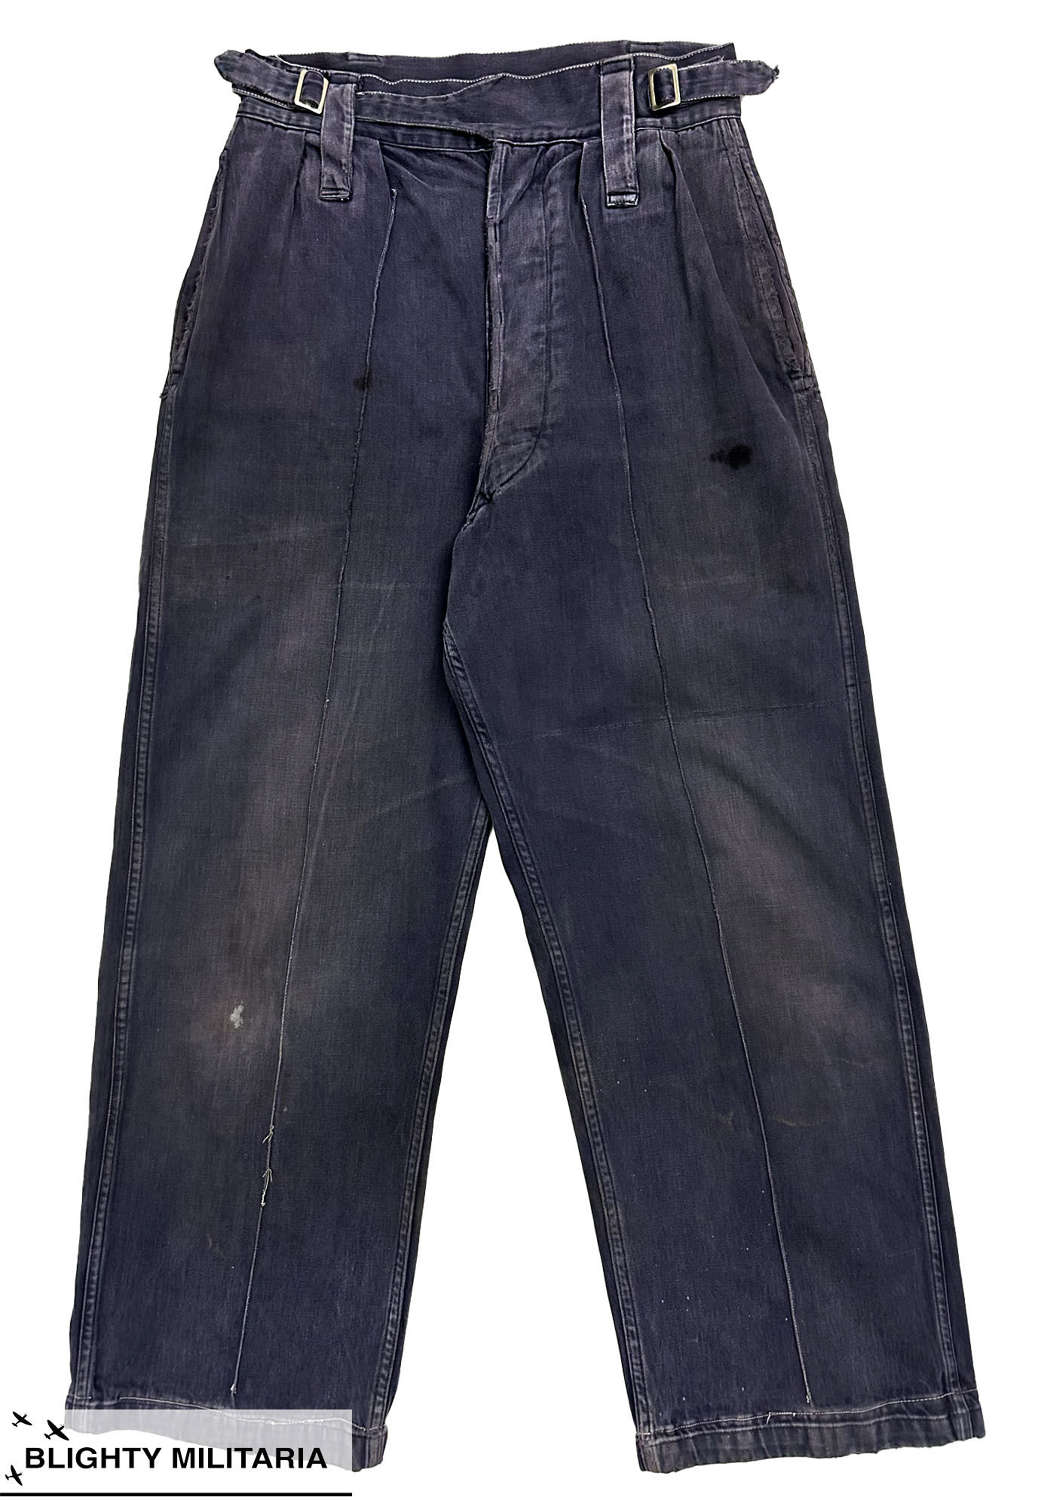 Original 1950s British Royal Navy Action Working Dress Trousers